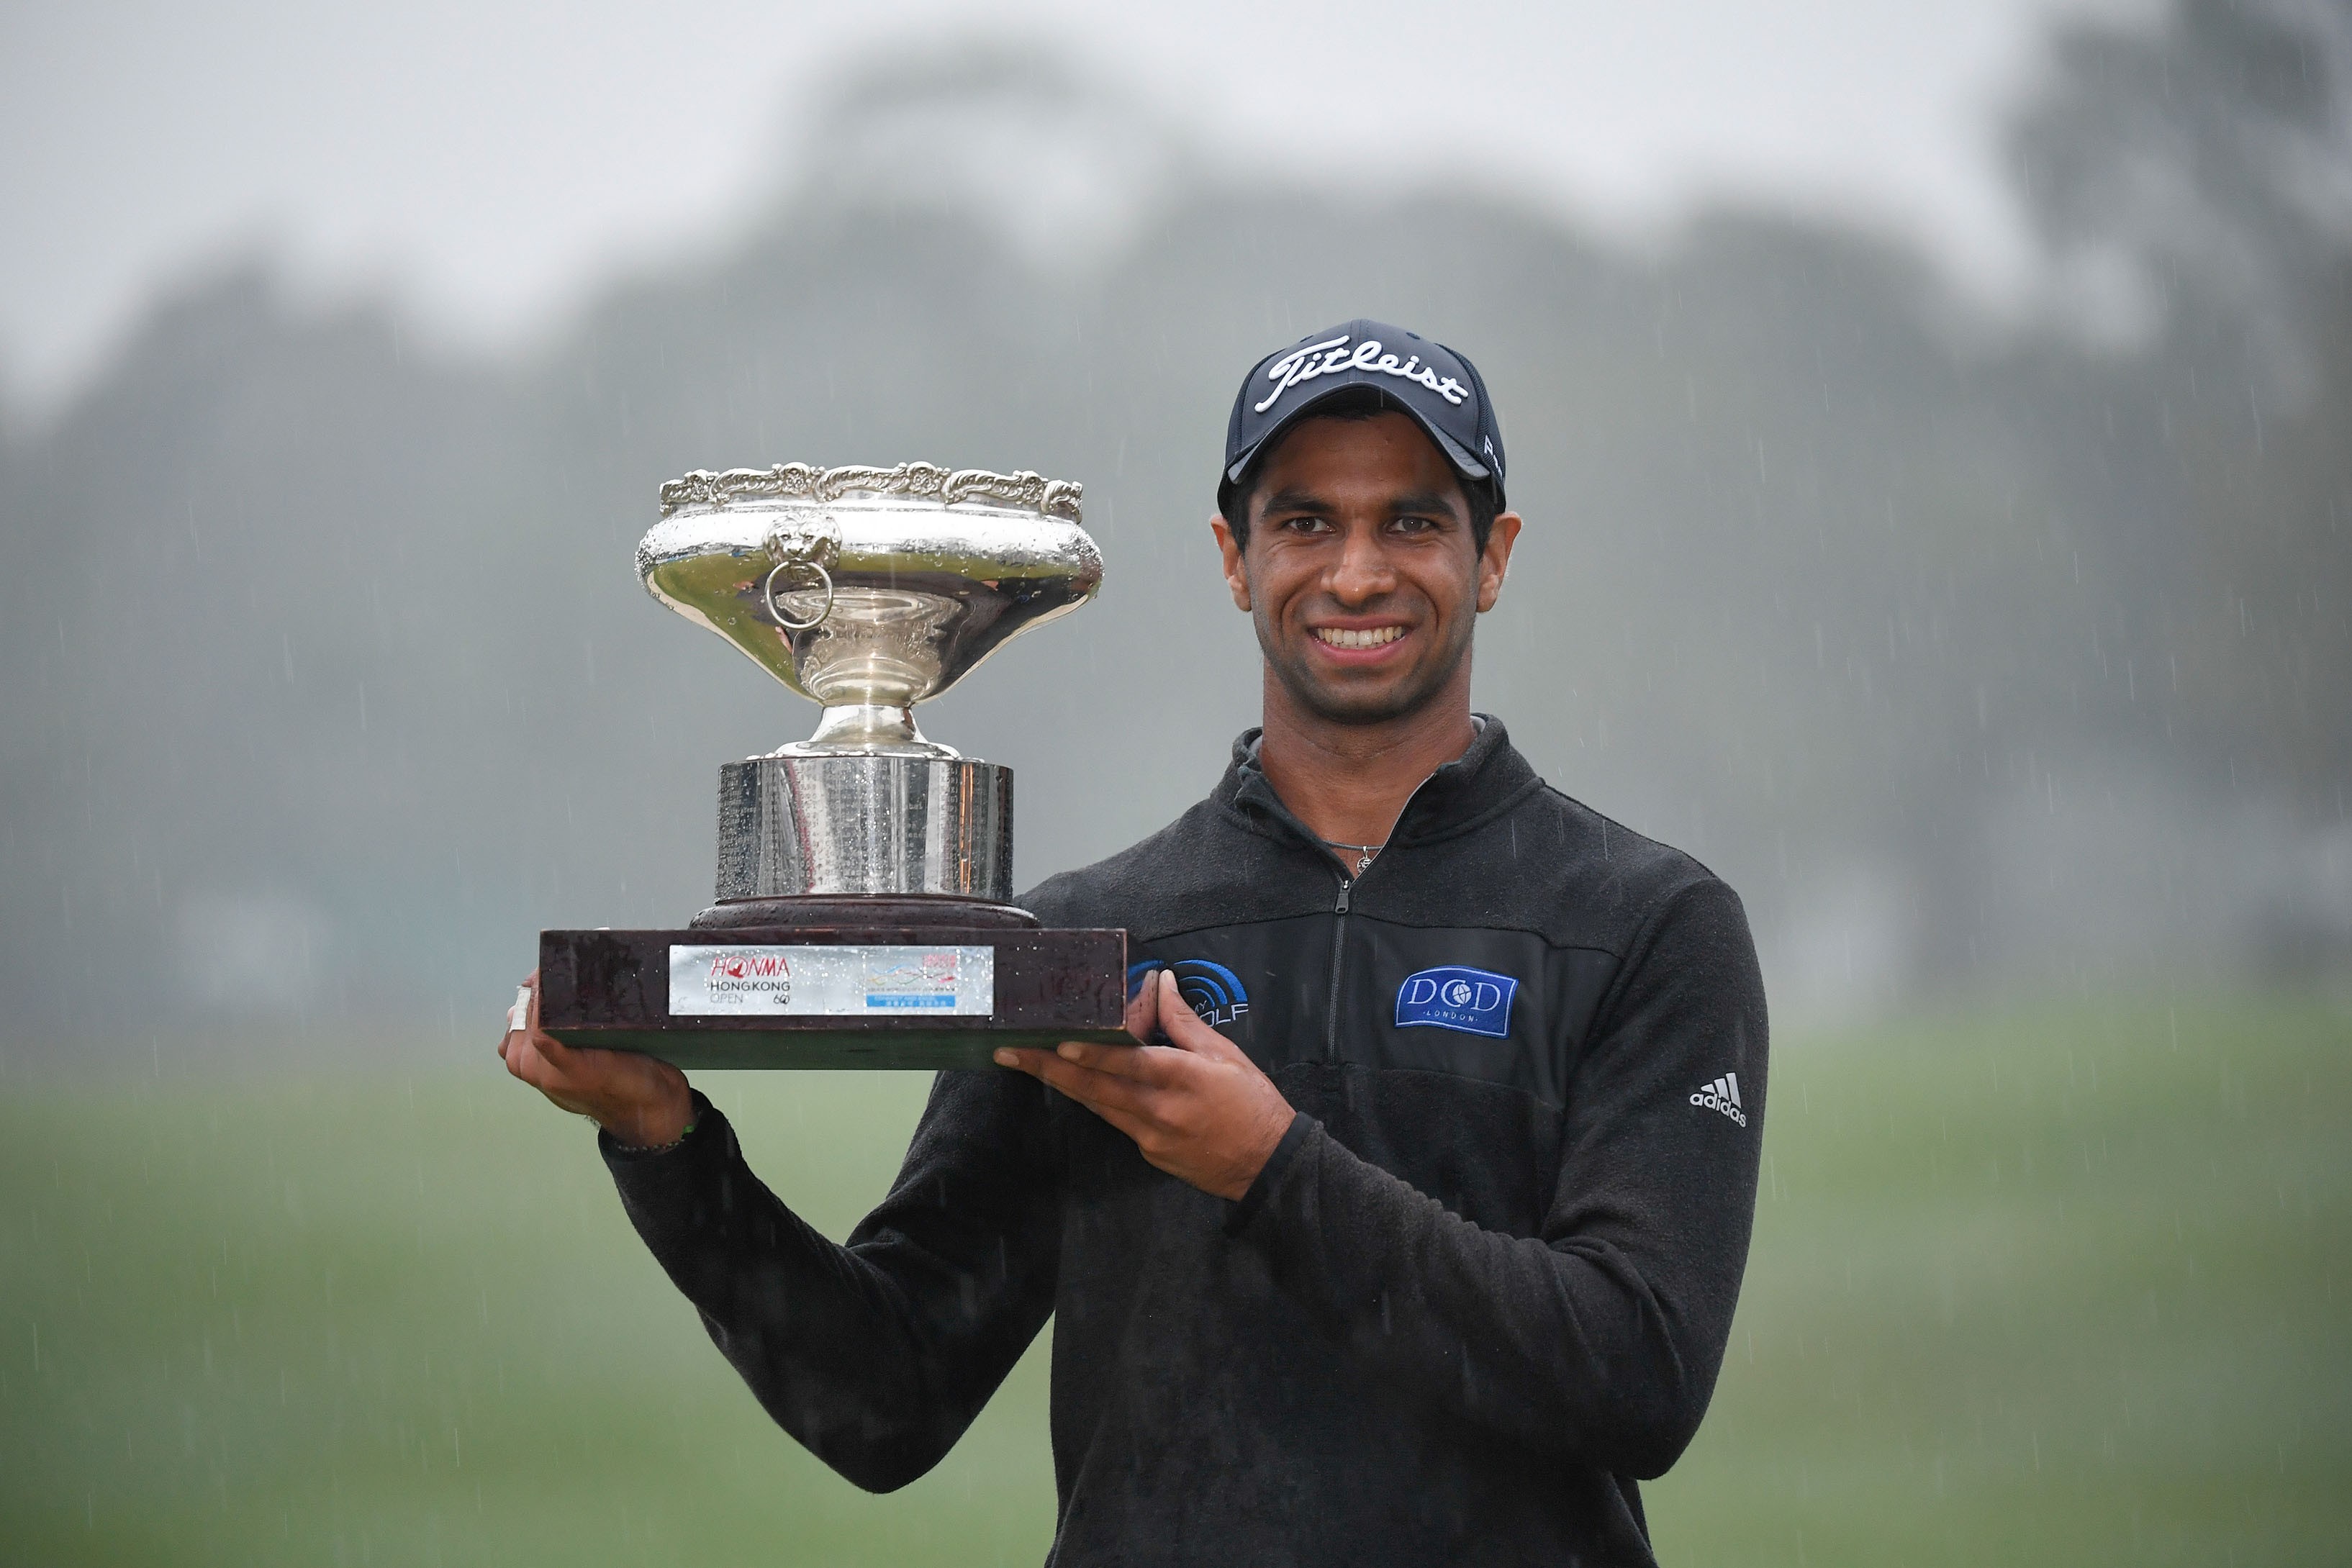 Aaron Rai with the winner’s trophy after his victory at the Hong Kong Open. Photos: Richard Castka